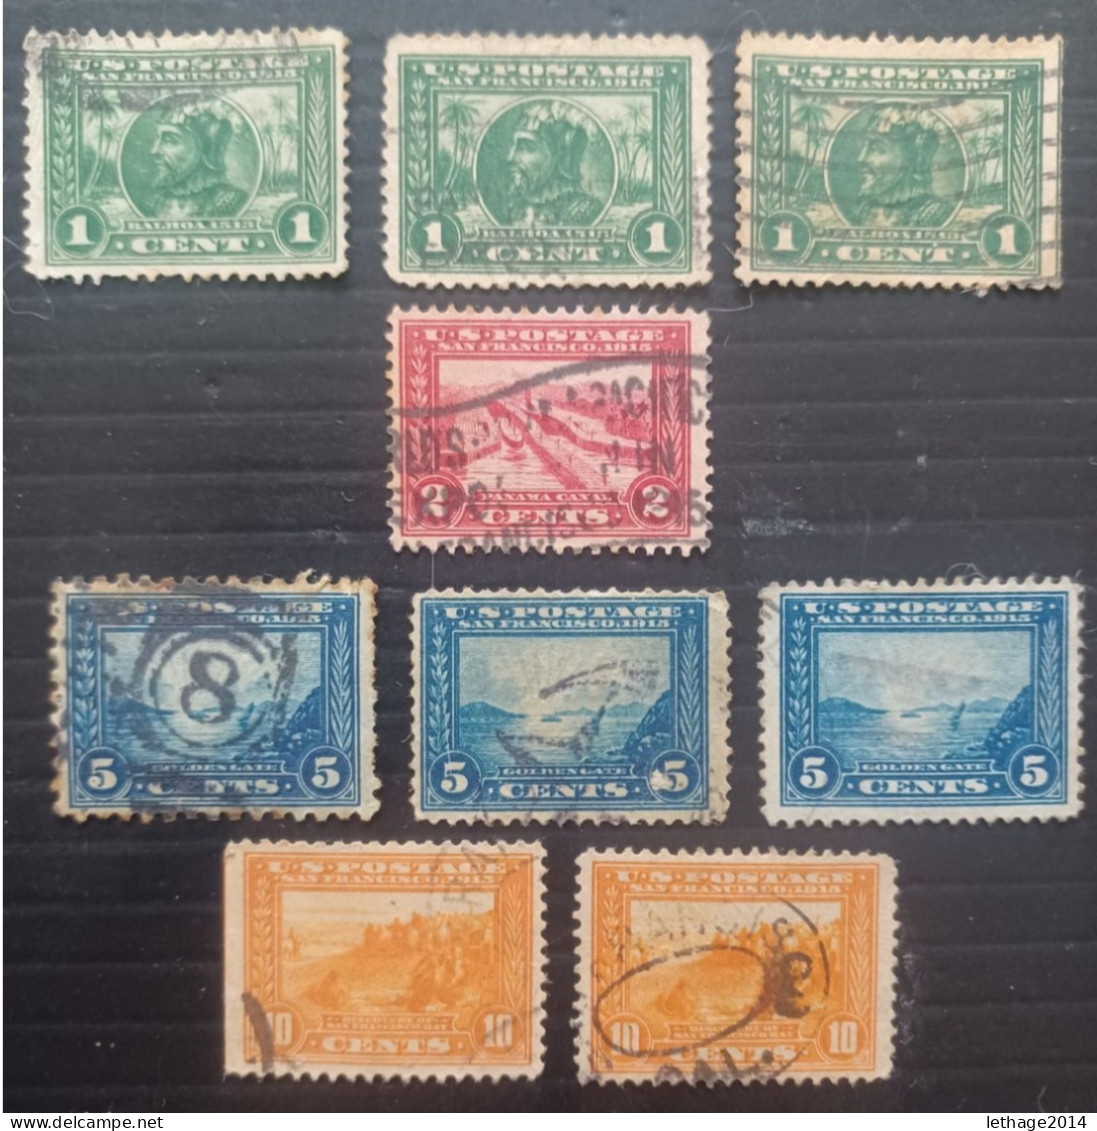 UNITED STATE 1913 PANAMA PACIFIC EXPOSITION SC N 397-398-399-400 DIFFERENT PERFORATIONS - Used Stamps